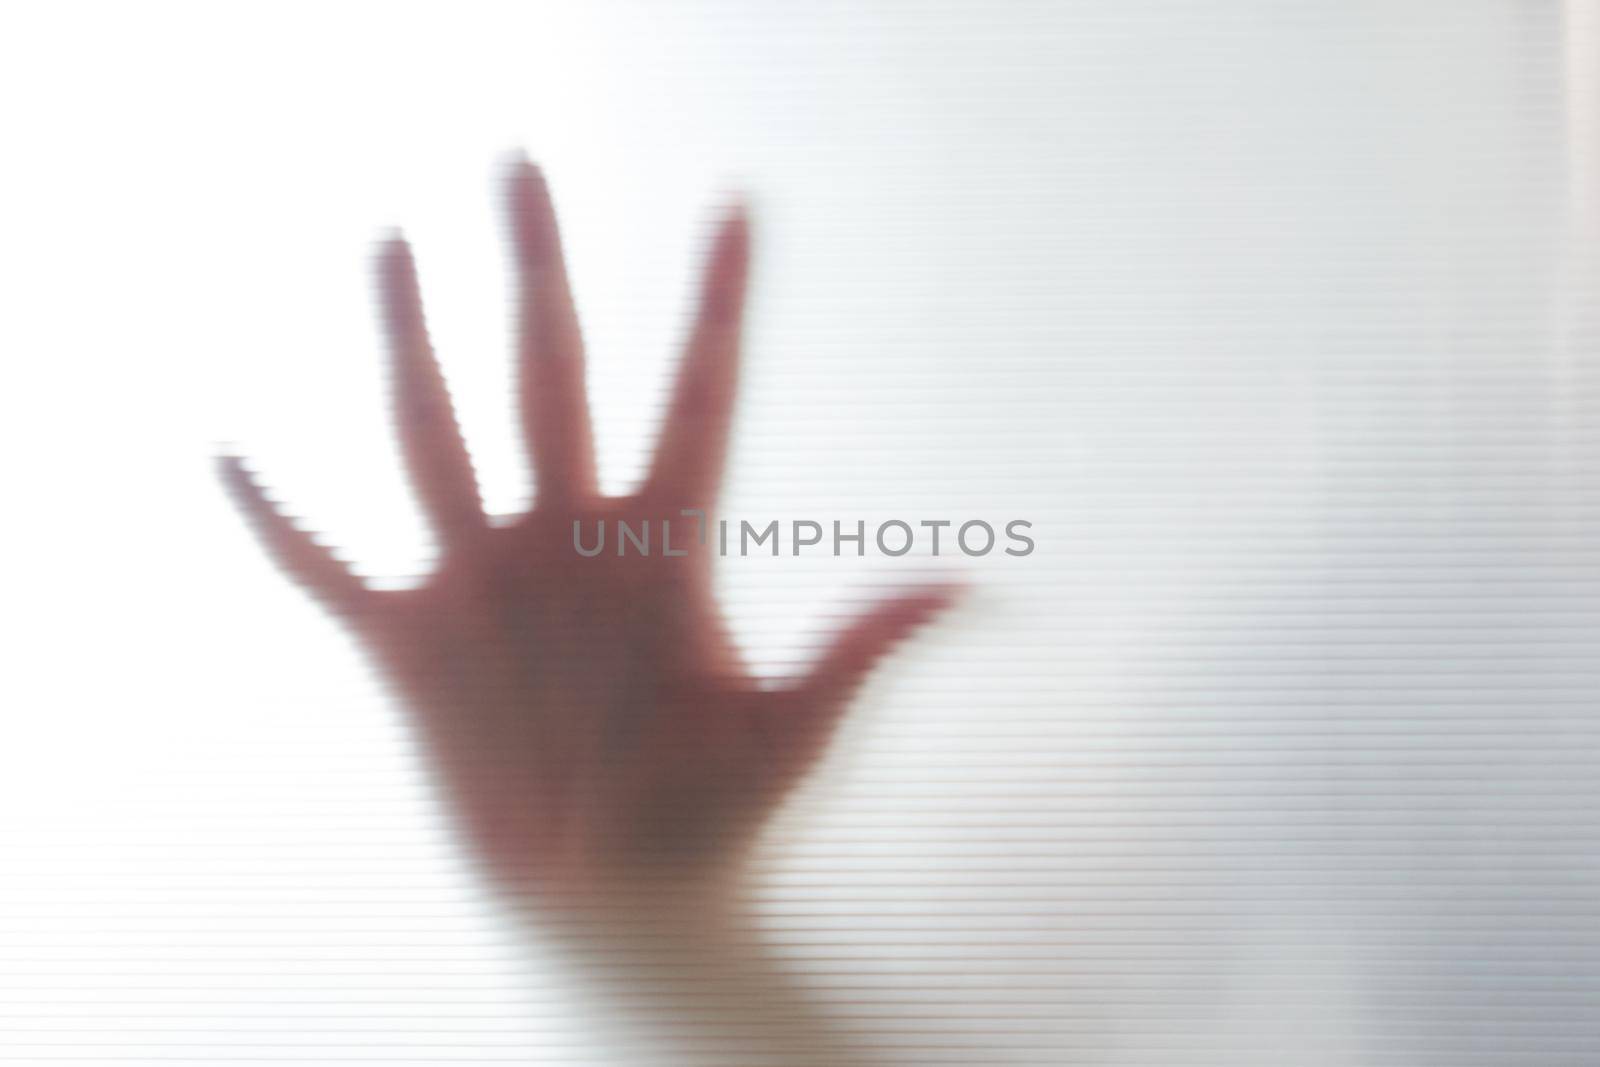 Diffused silhouette of female hands through plastic by Mariakray